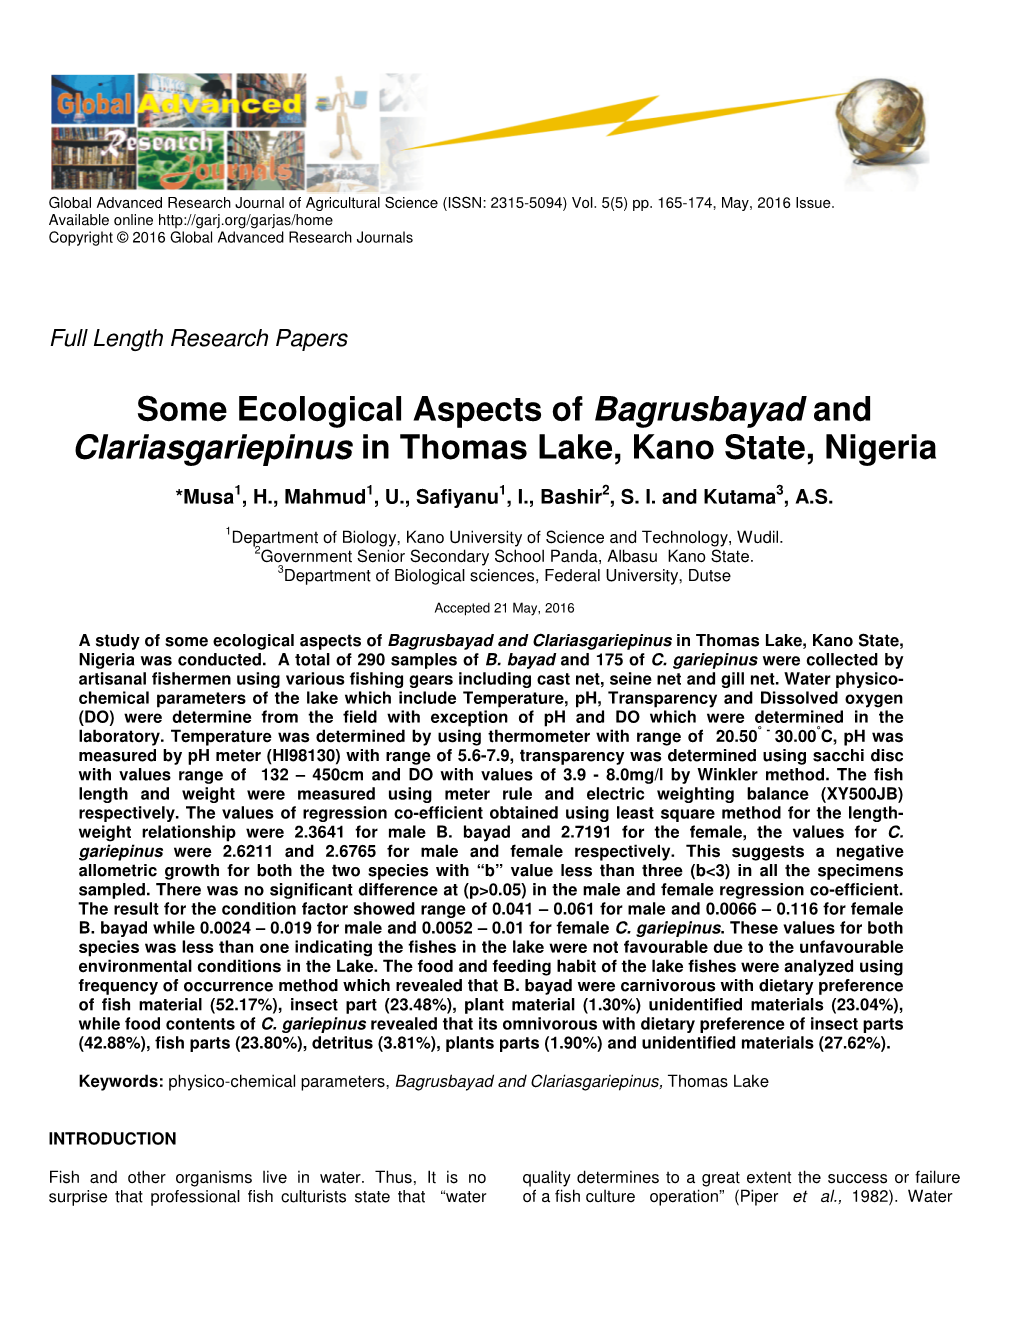 Some Ecological Aspects of Bagrusbayad and Clariasgariepinus in Thomas Lake, Kano State, Nigeria